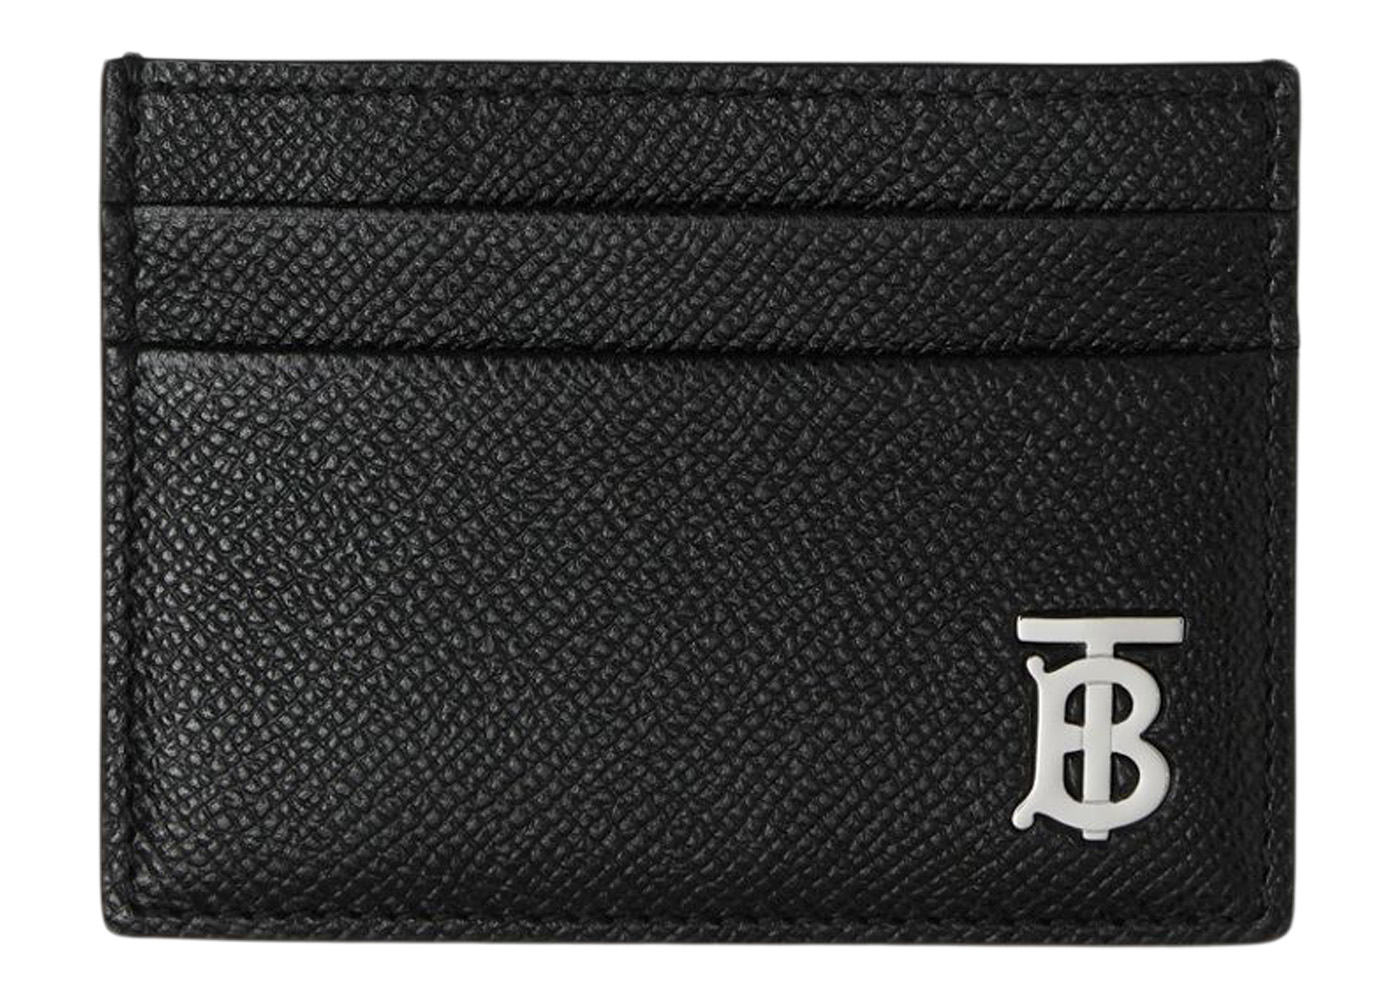 Burberry Grainy Leather TB Card Case Black/Silver-tone in Calfskin